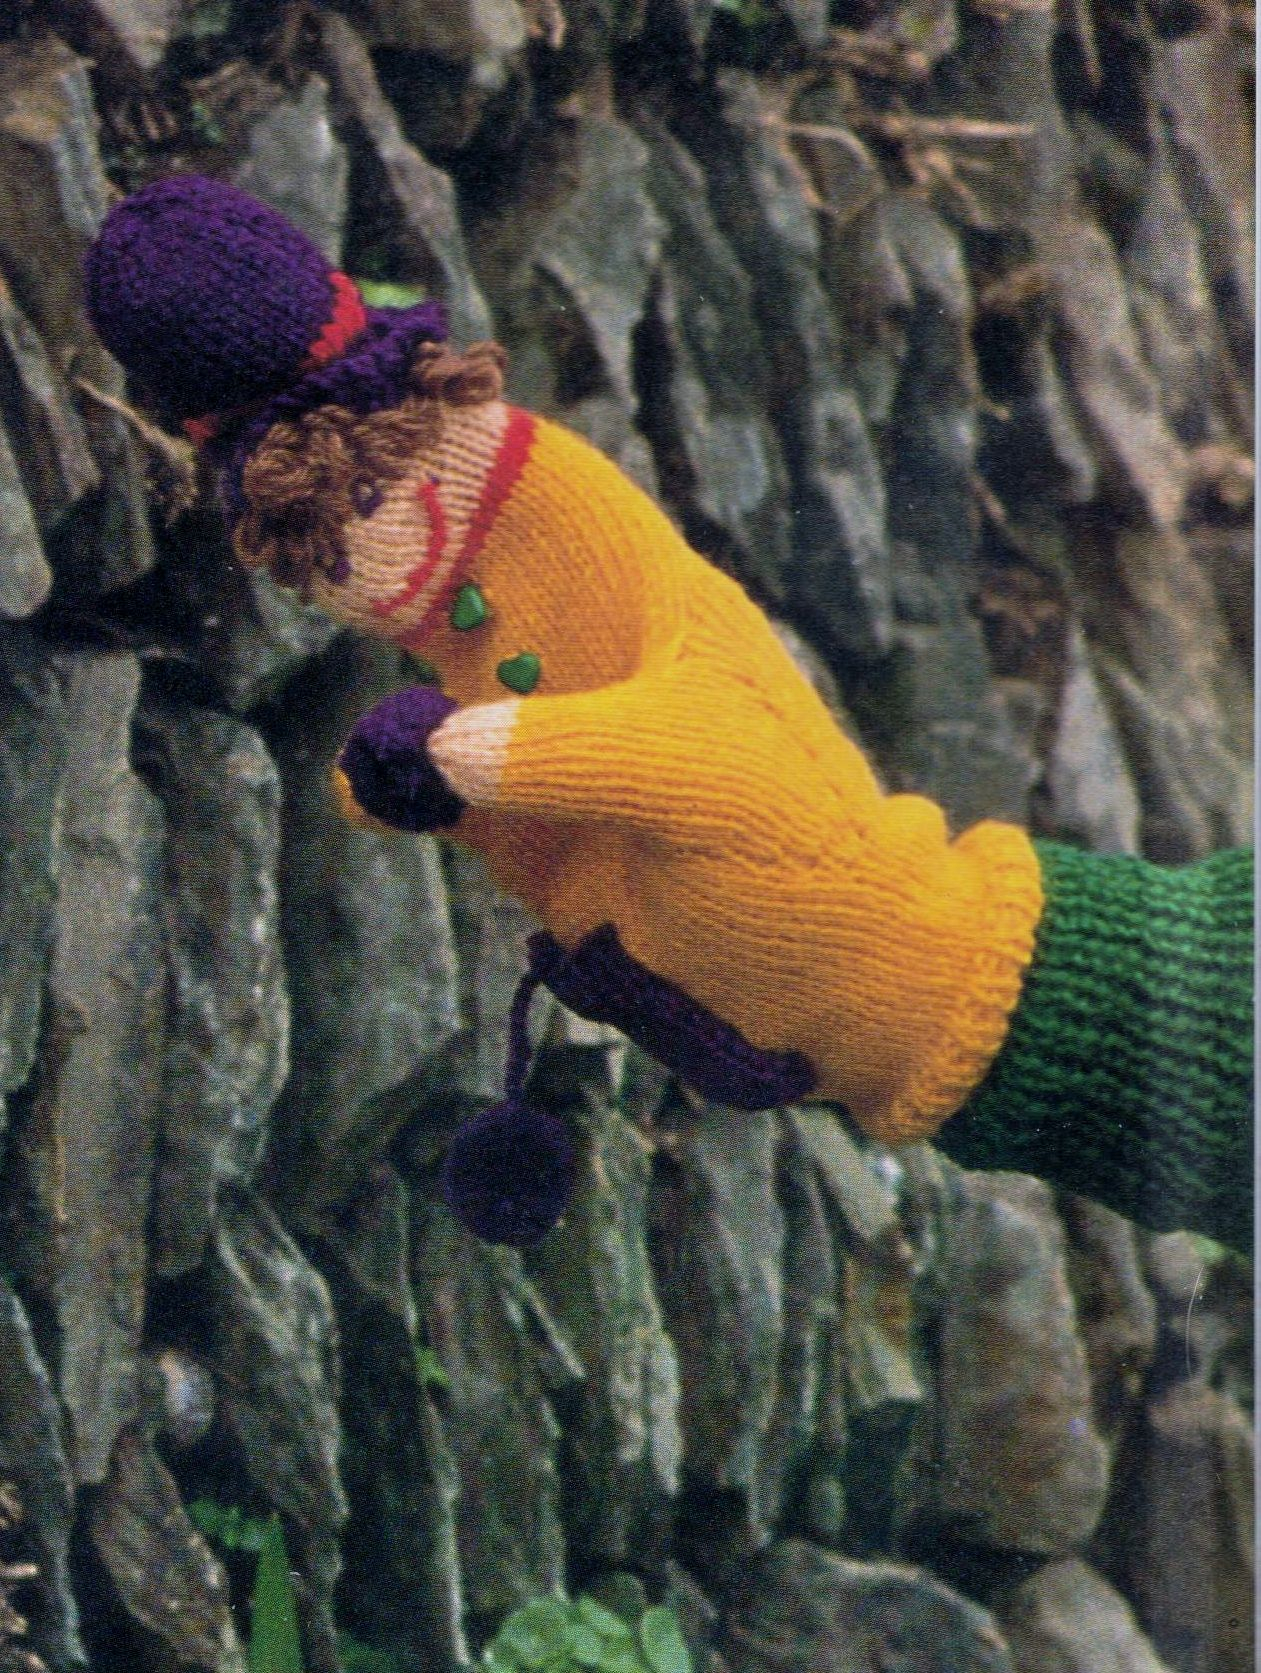 Knitting Patterns For Finger Puppets Pdf Vintage Knitting Pattern Little Jack Horner Finger Puppet Mittens Glove Puppet